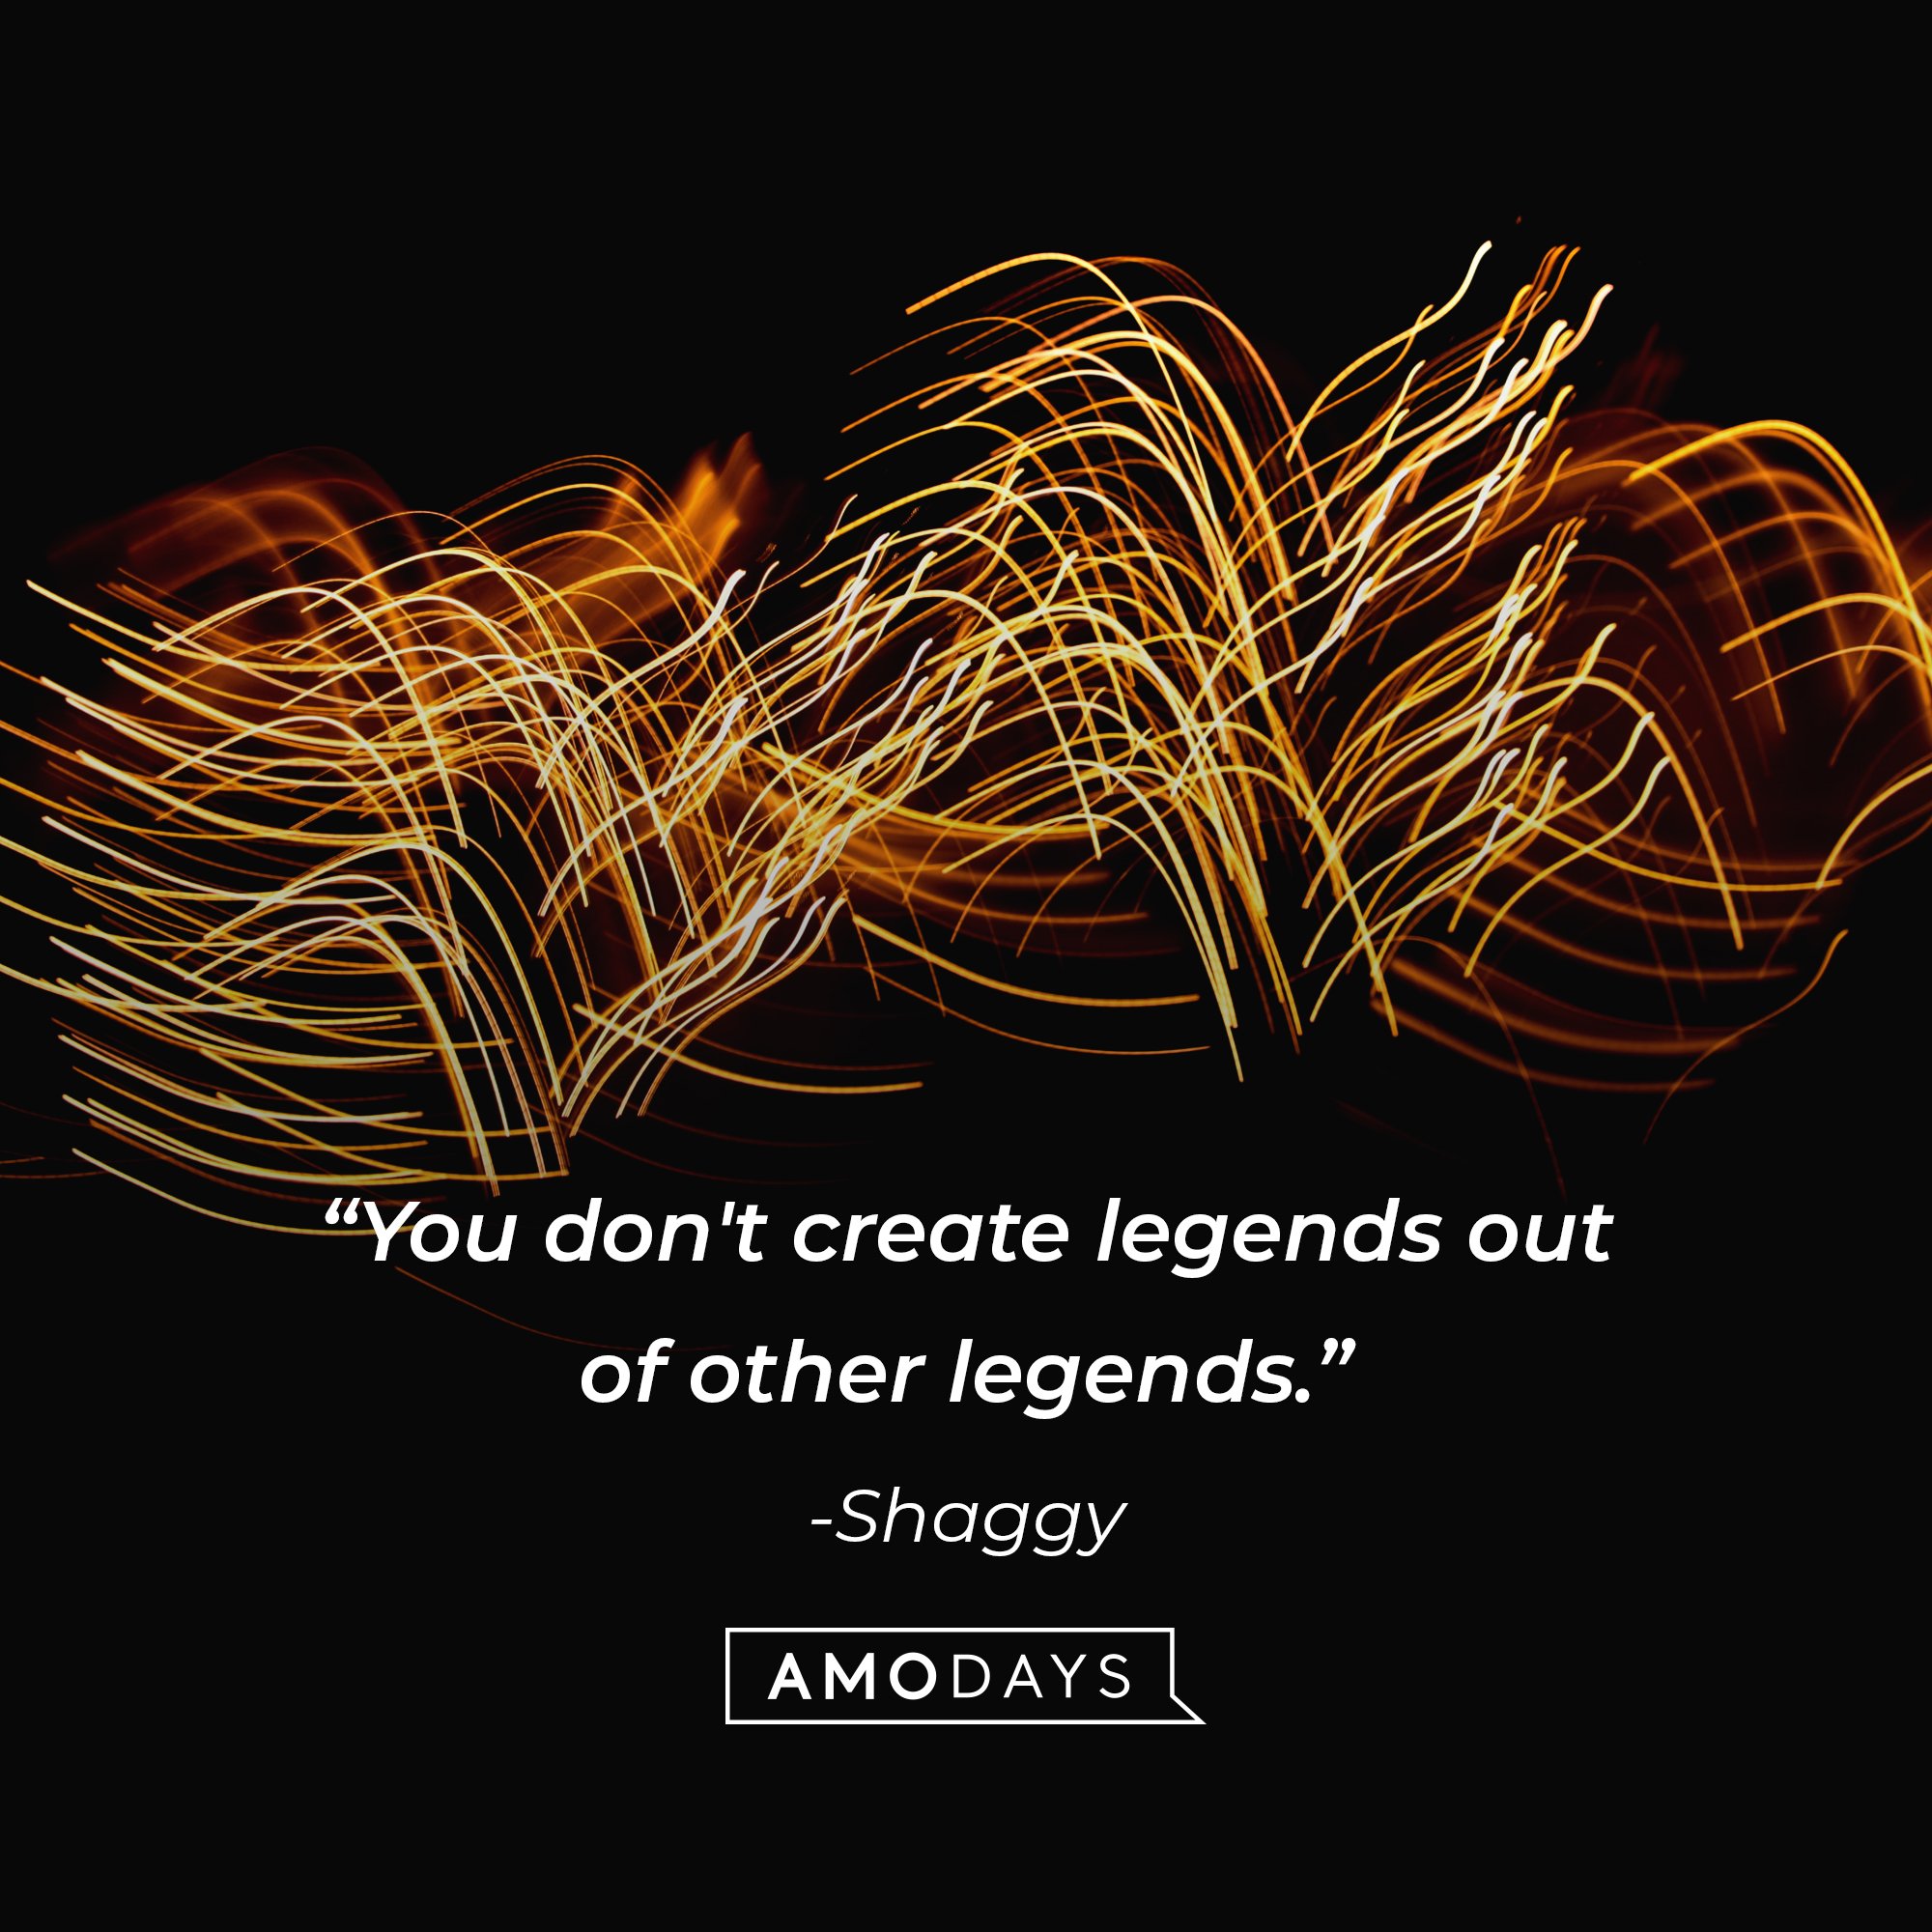 Shaggy's quote: "You don't create legends out of other legends.” | Image: AmoDays